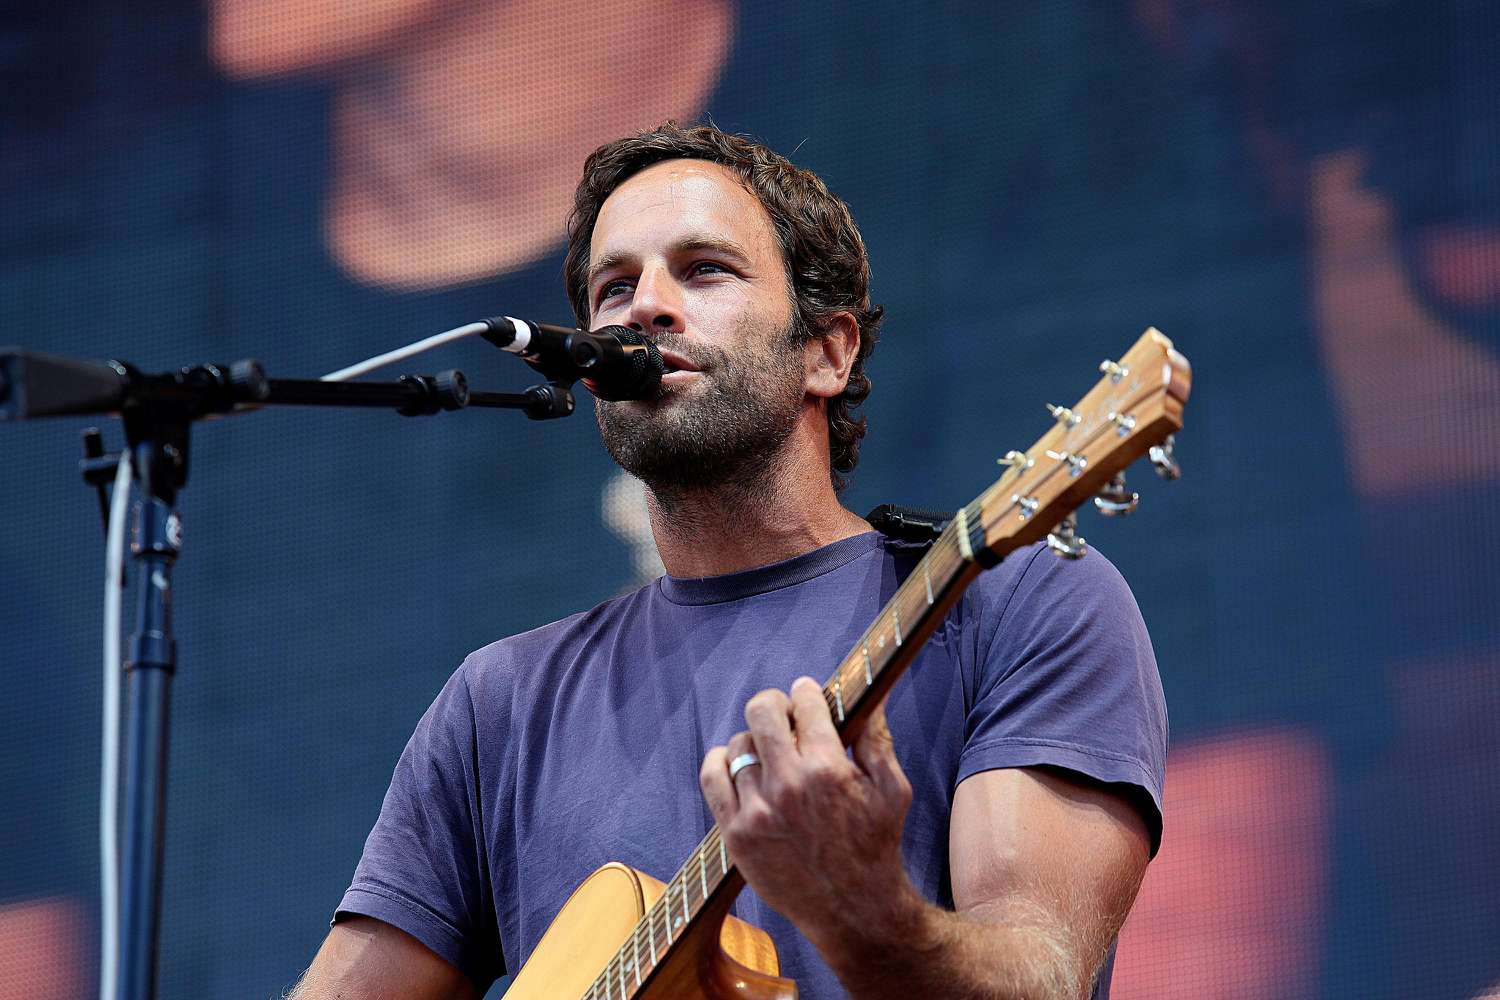 Jack Johnson Biography: Wife, Age, Net Worth, Songs, Albums, Billboard, Movies